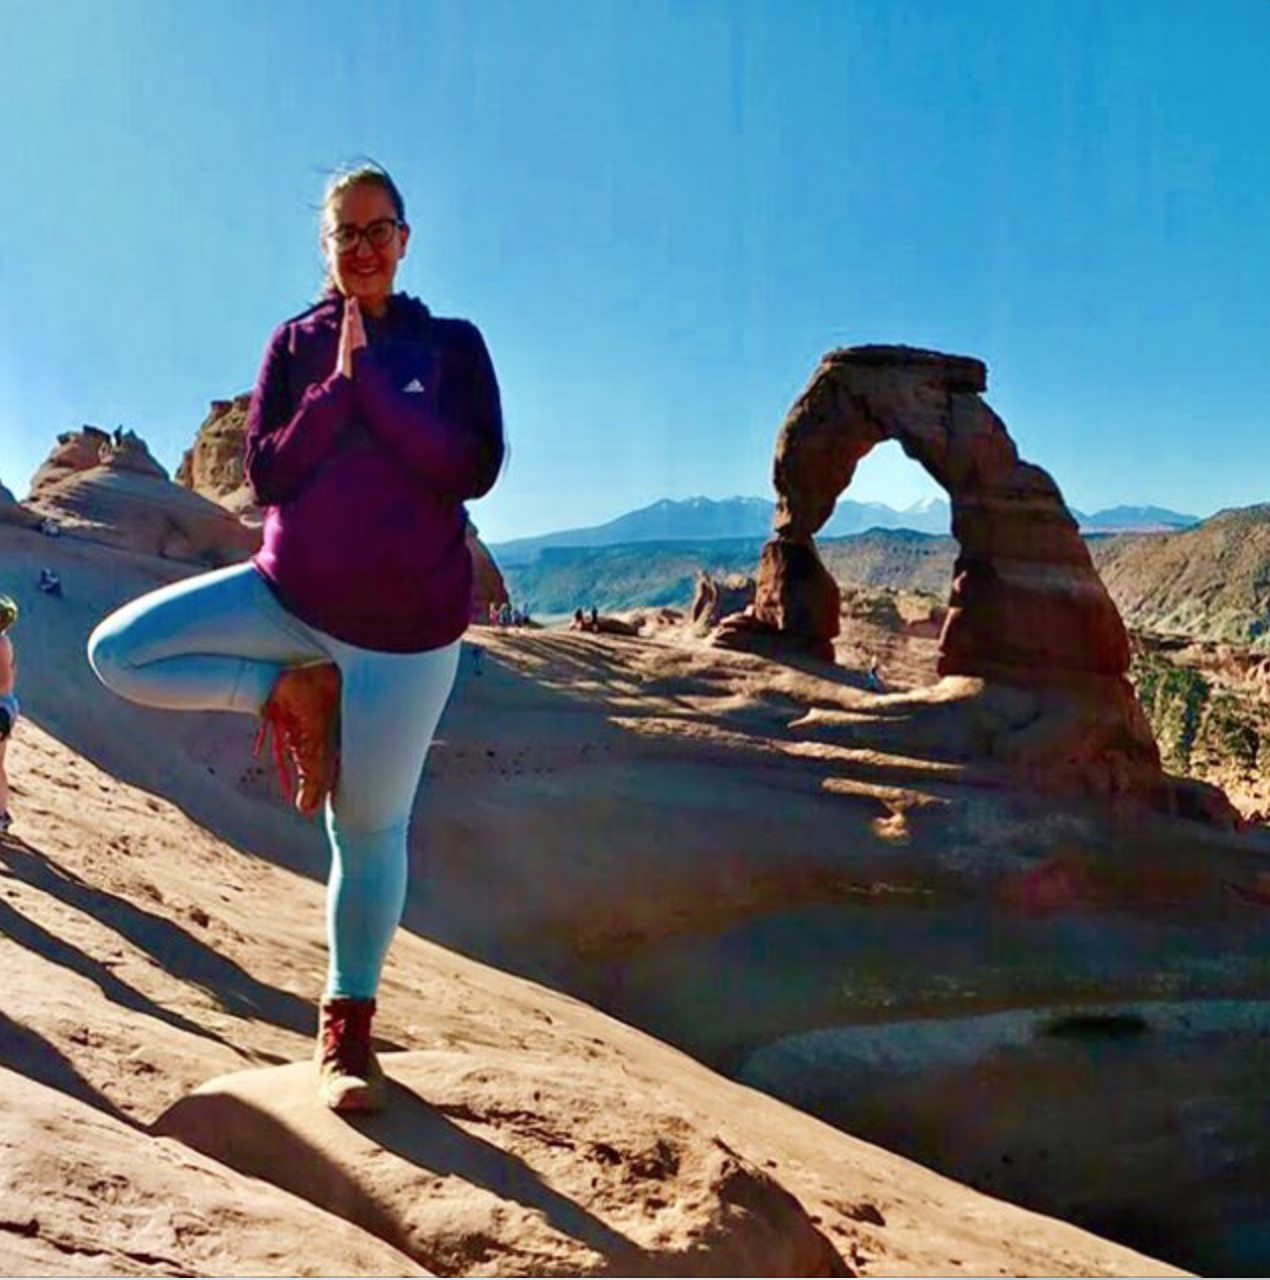 A woman does tree pose by a natural stone arch.